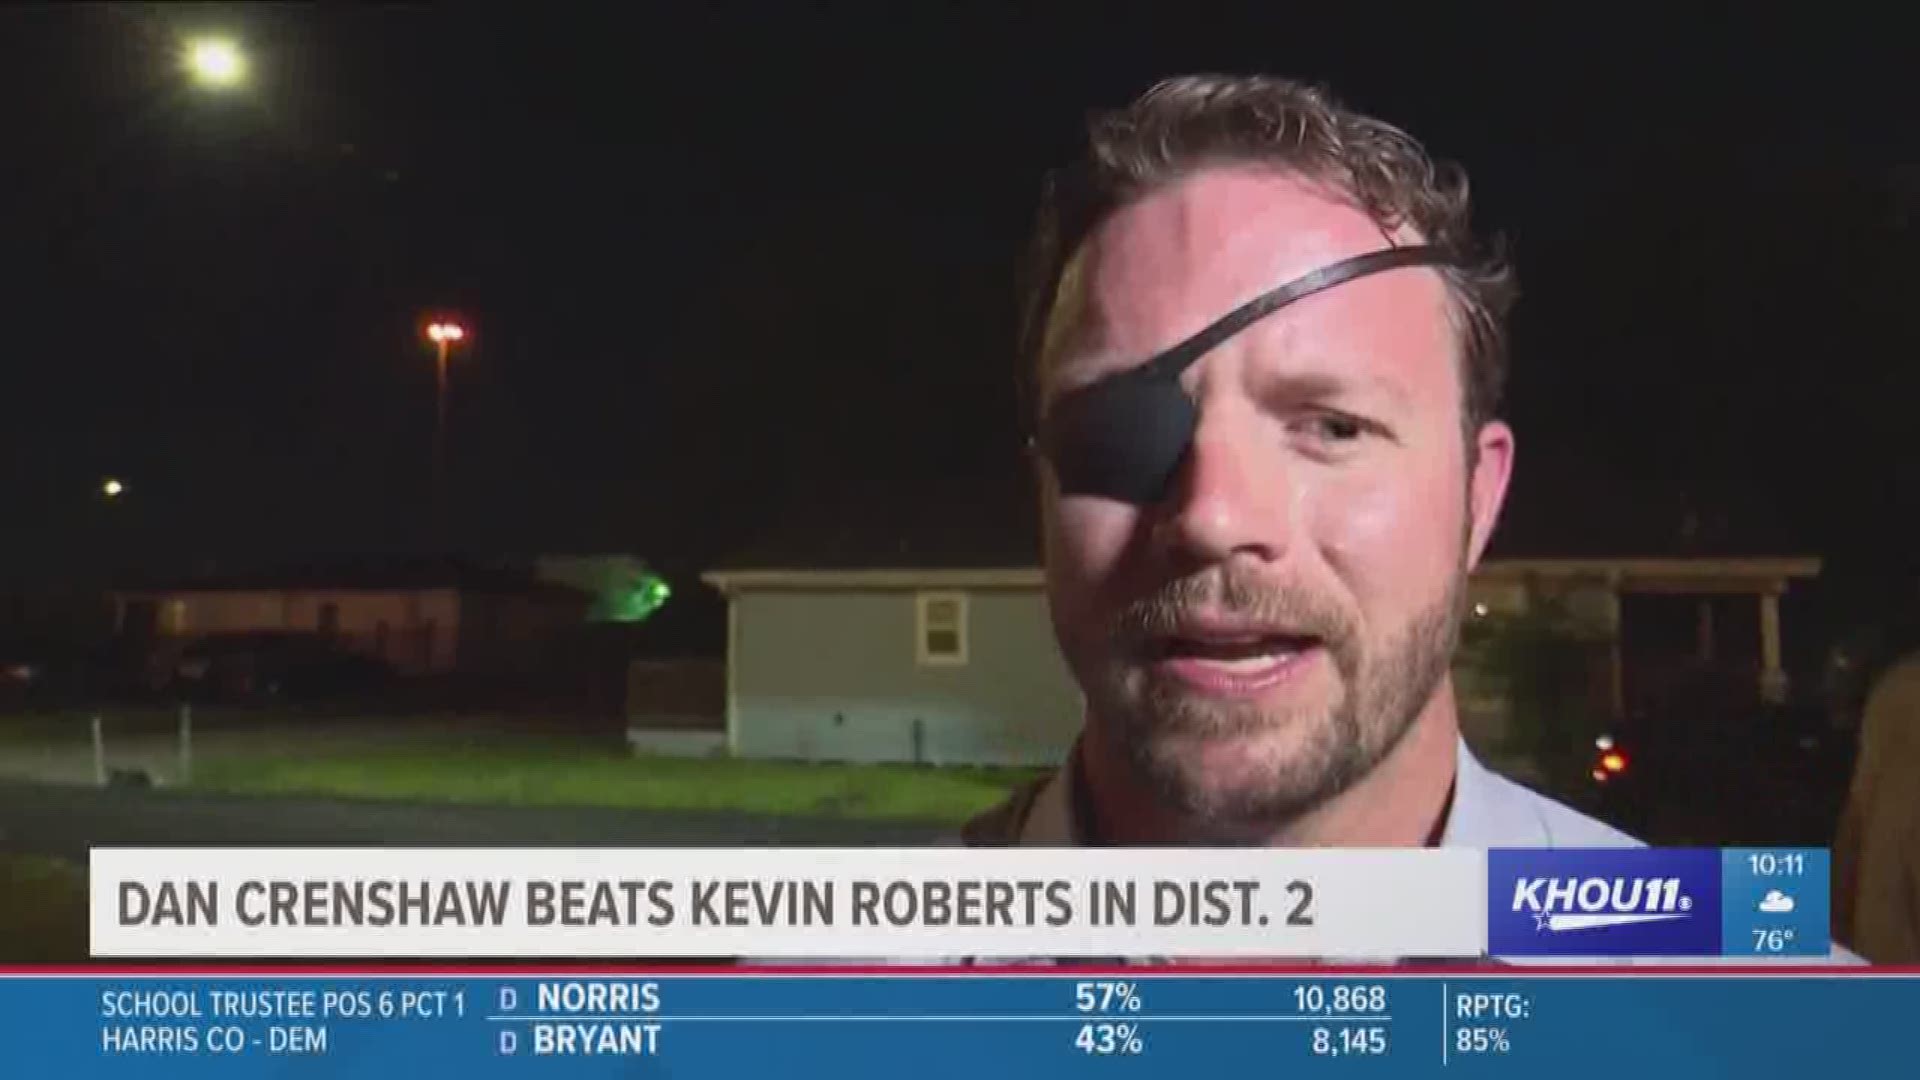 Dan Crenshaw beat Kevin Roberts in a runoff to take the Republican spot for State Rep. District 2.